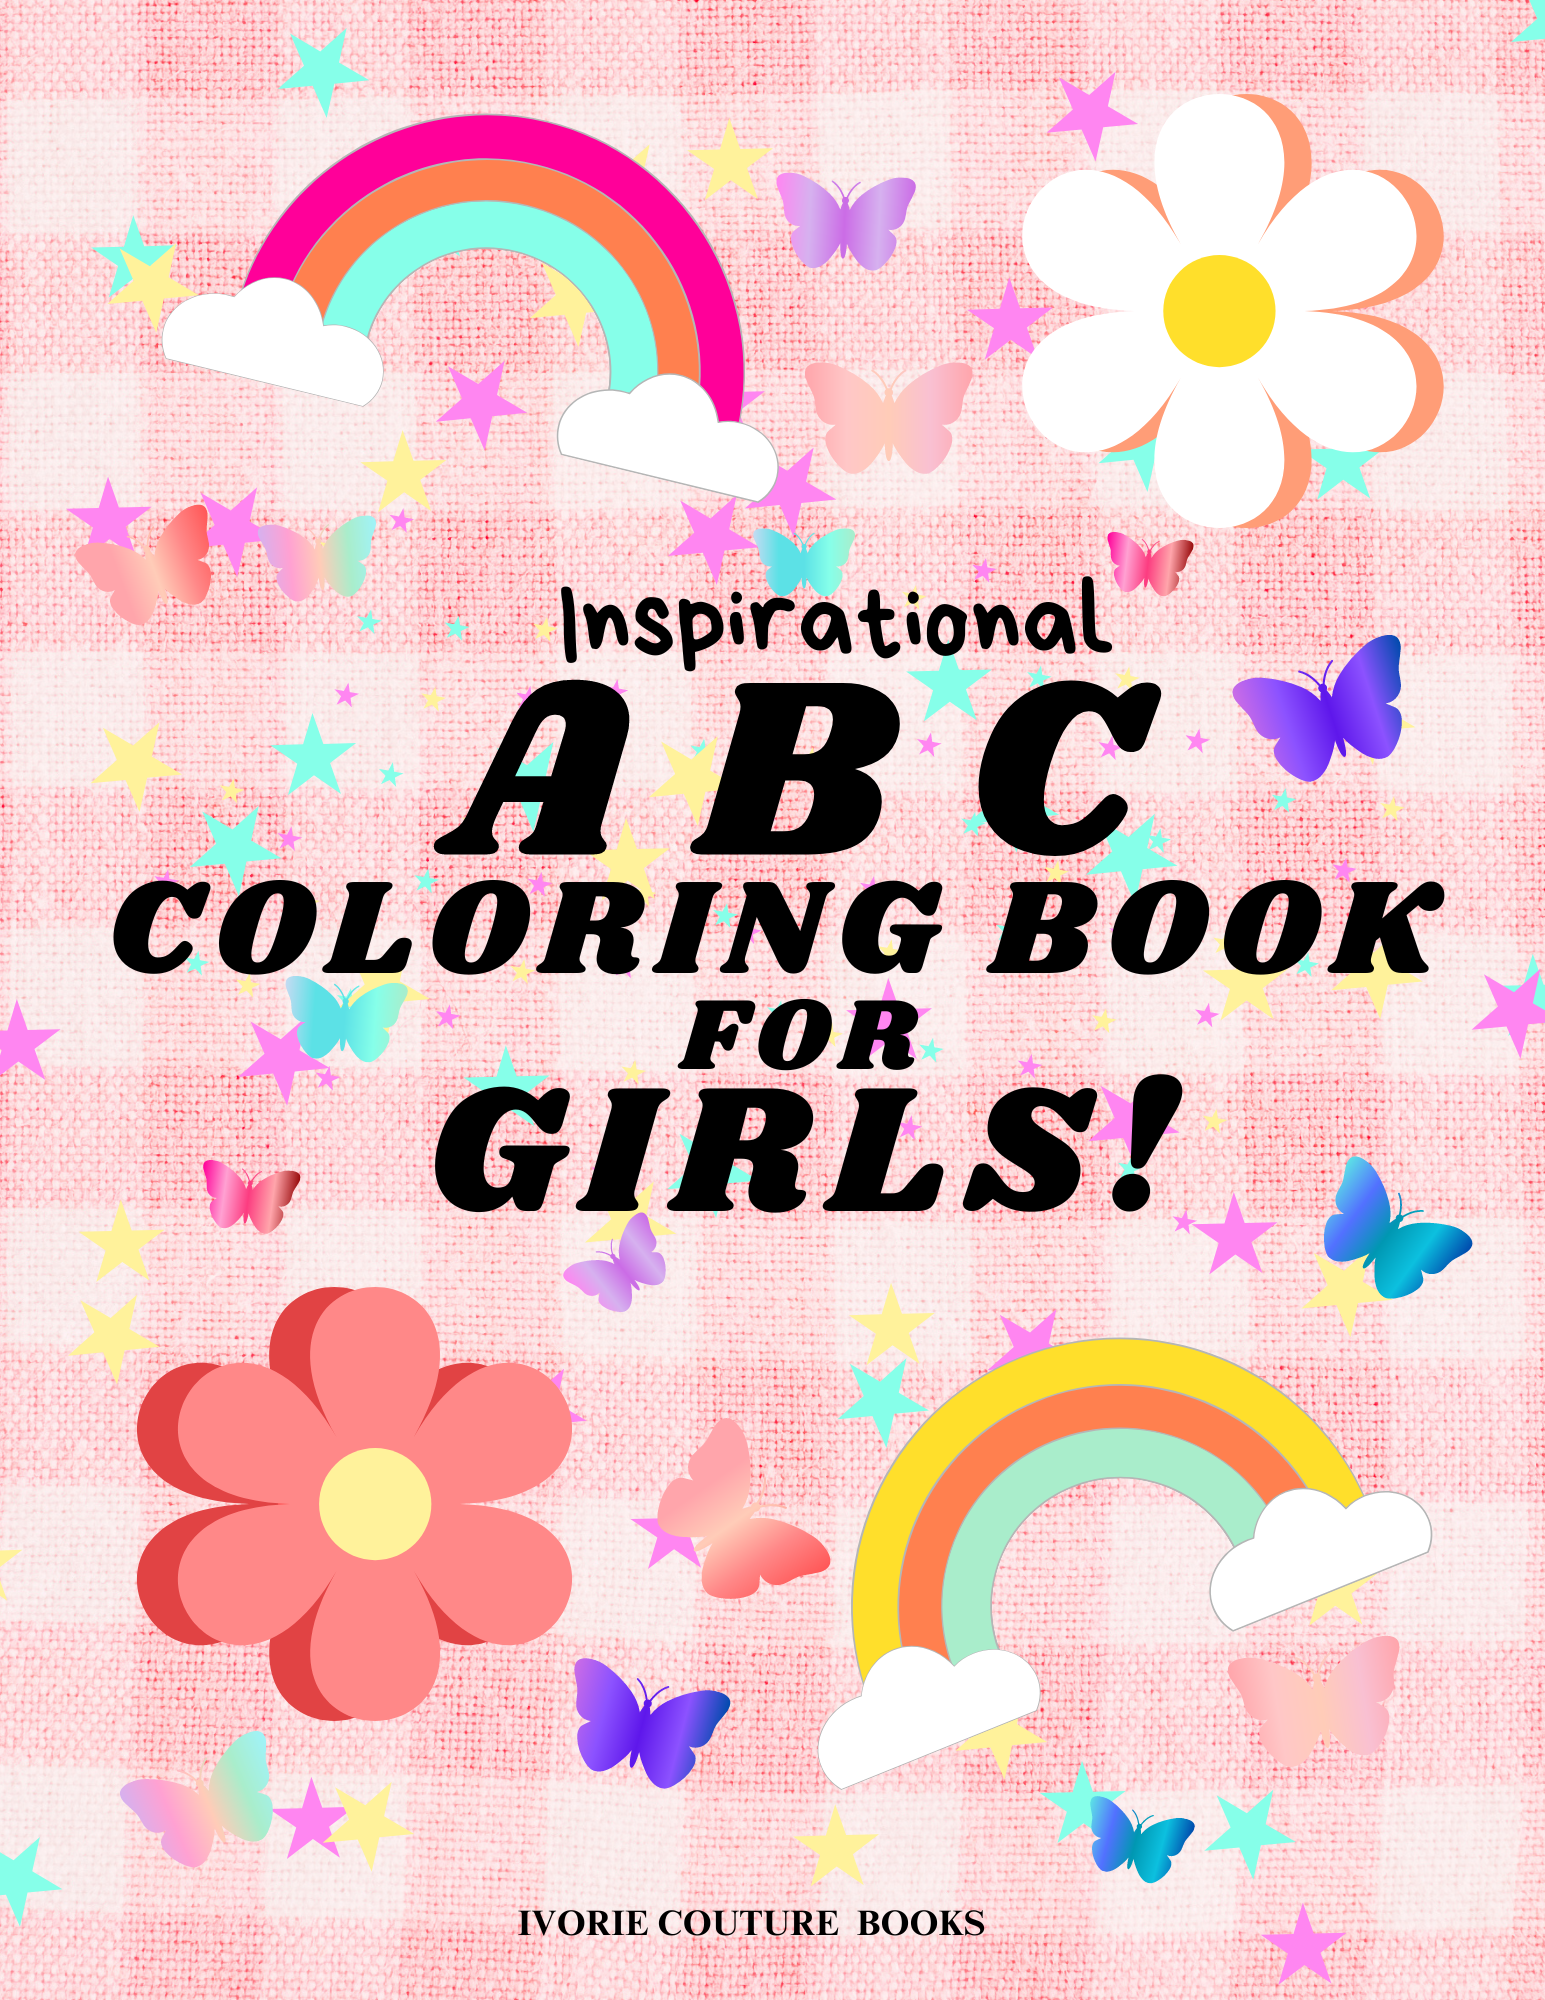 AMAZING BOYS! ABC COLORING BOOK with inspirational quotes on each page! Practice writing on each page!